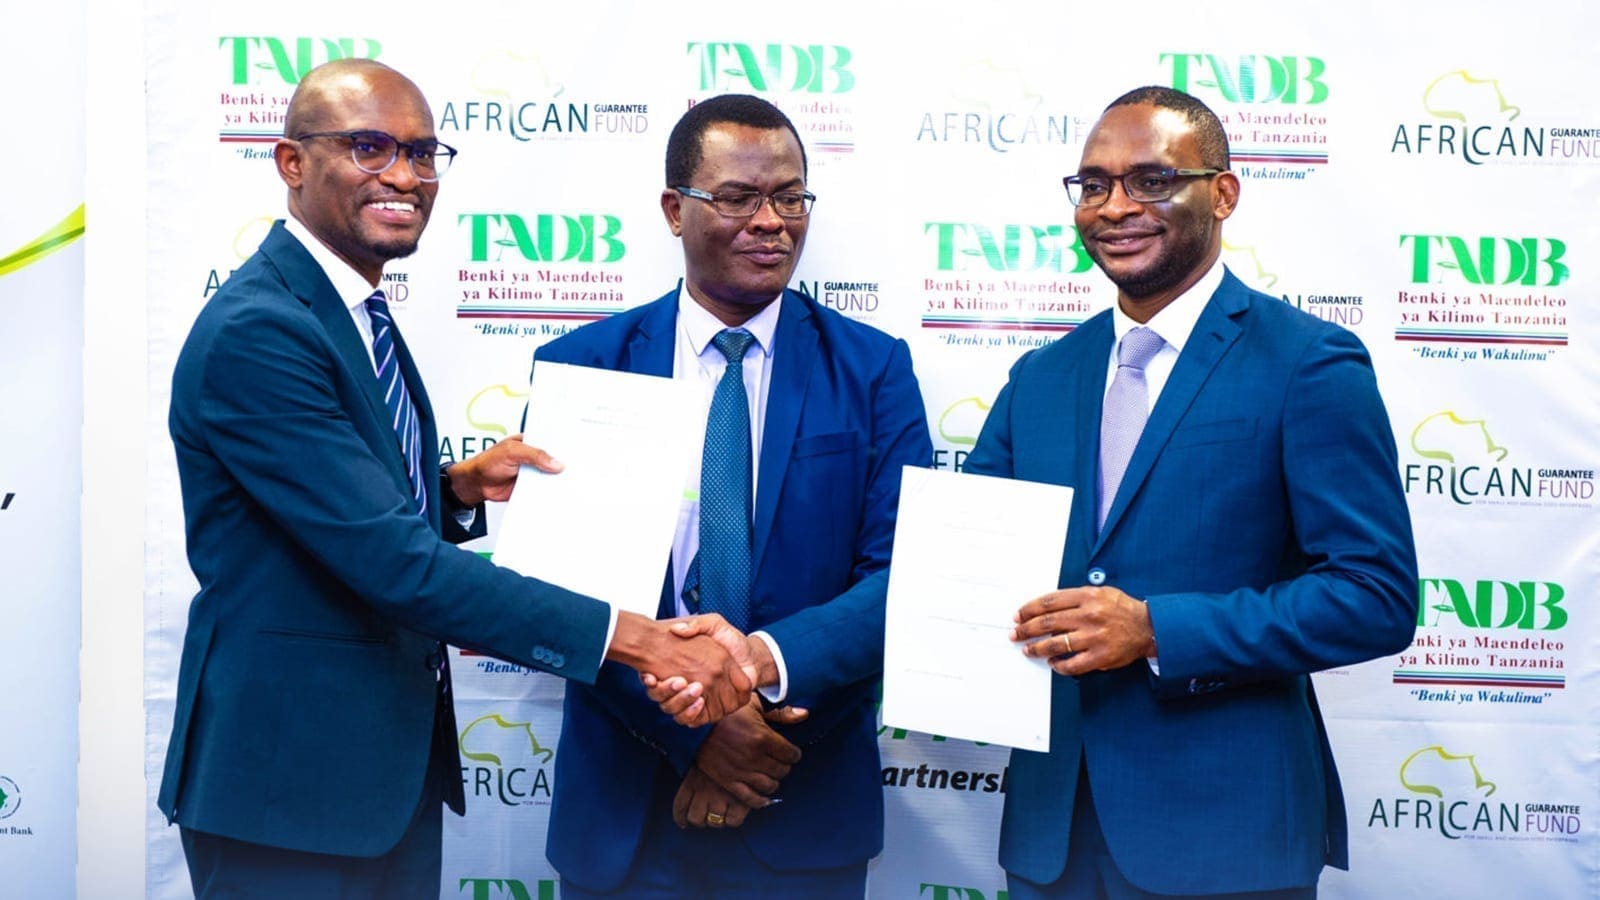 TADB partner with AGF to support agribusiness enterprises in Tanzania with US$20m financing